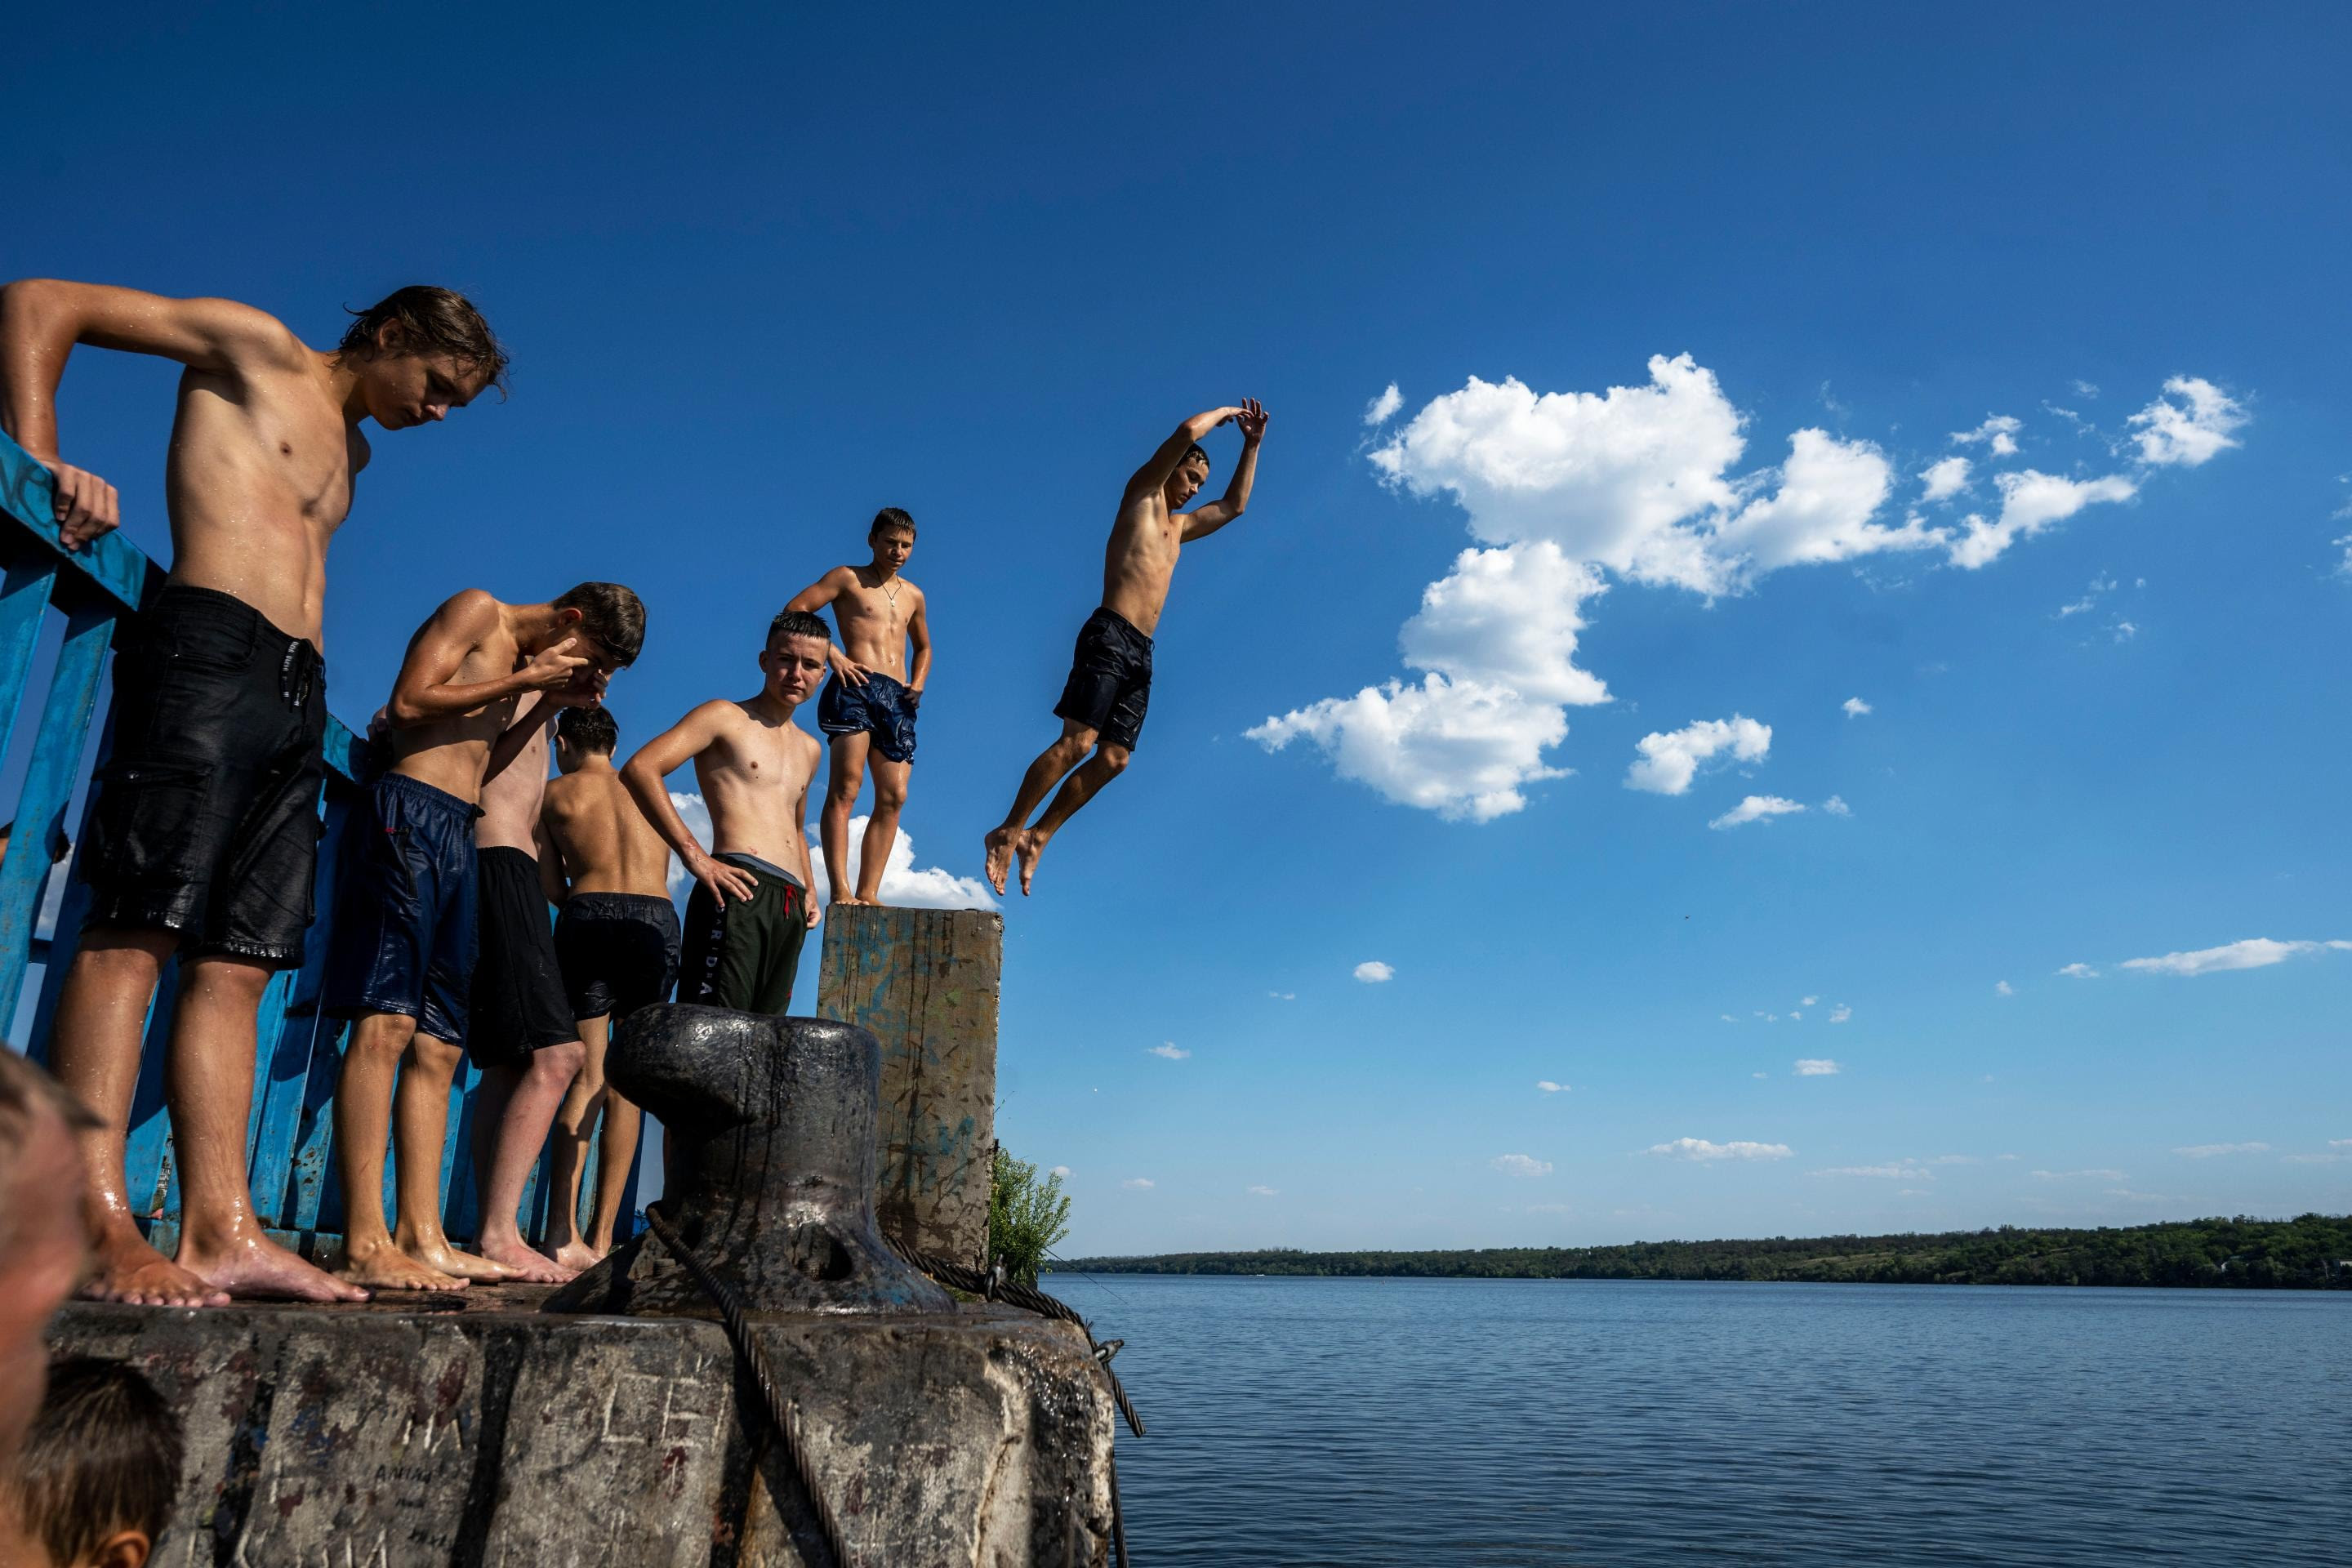 Teenagers jumping into the Dnipro river in Zaporizhzhia